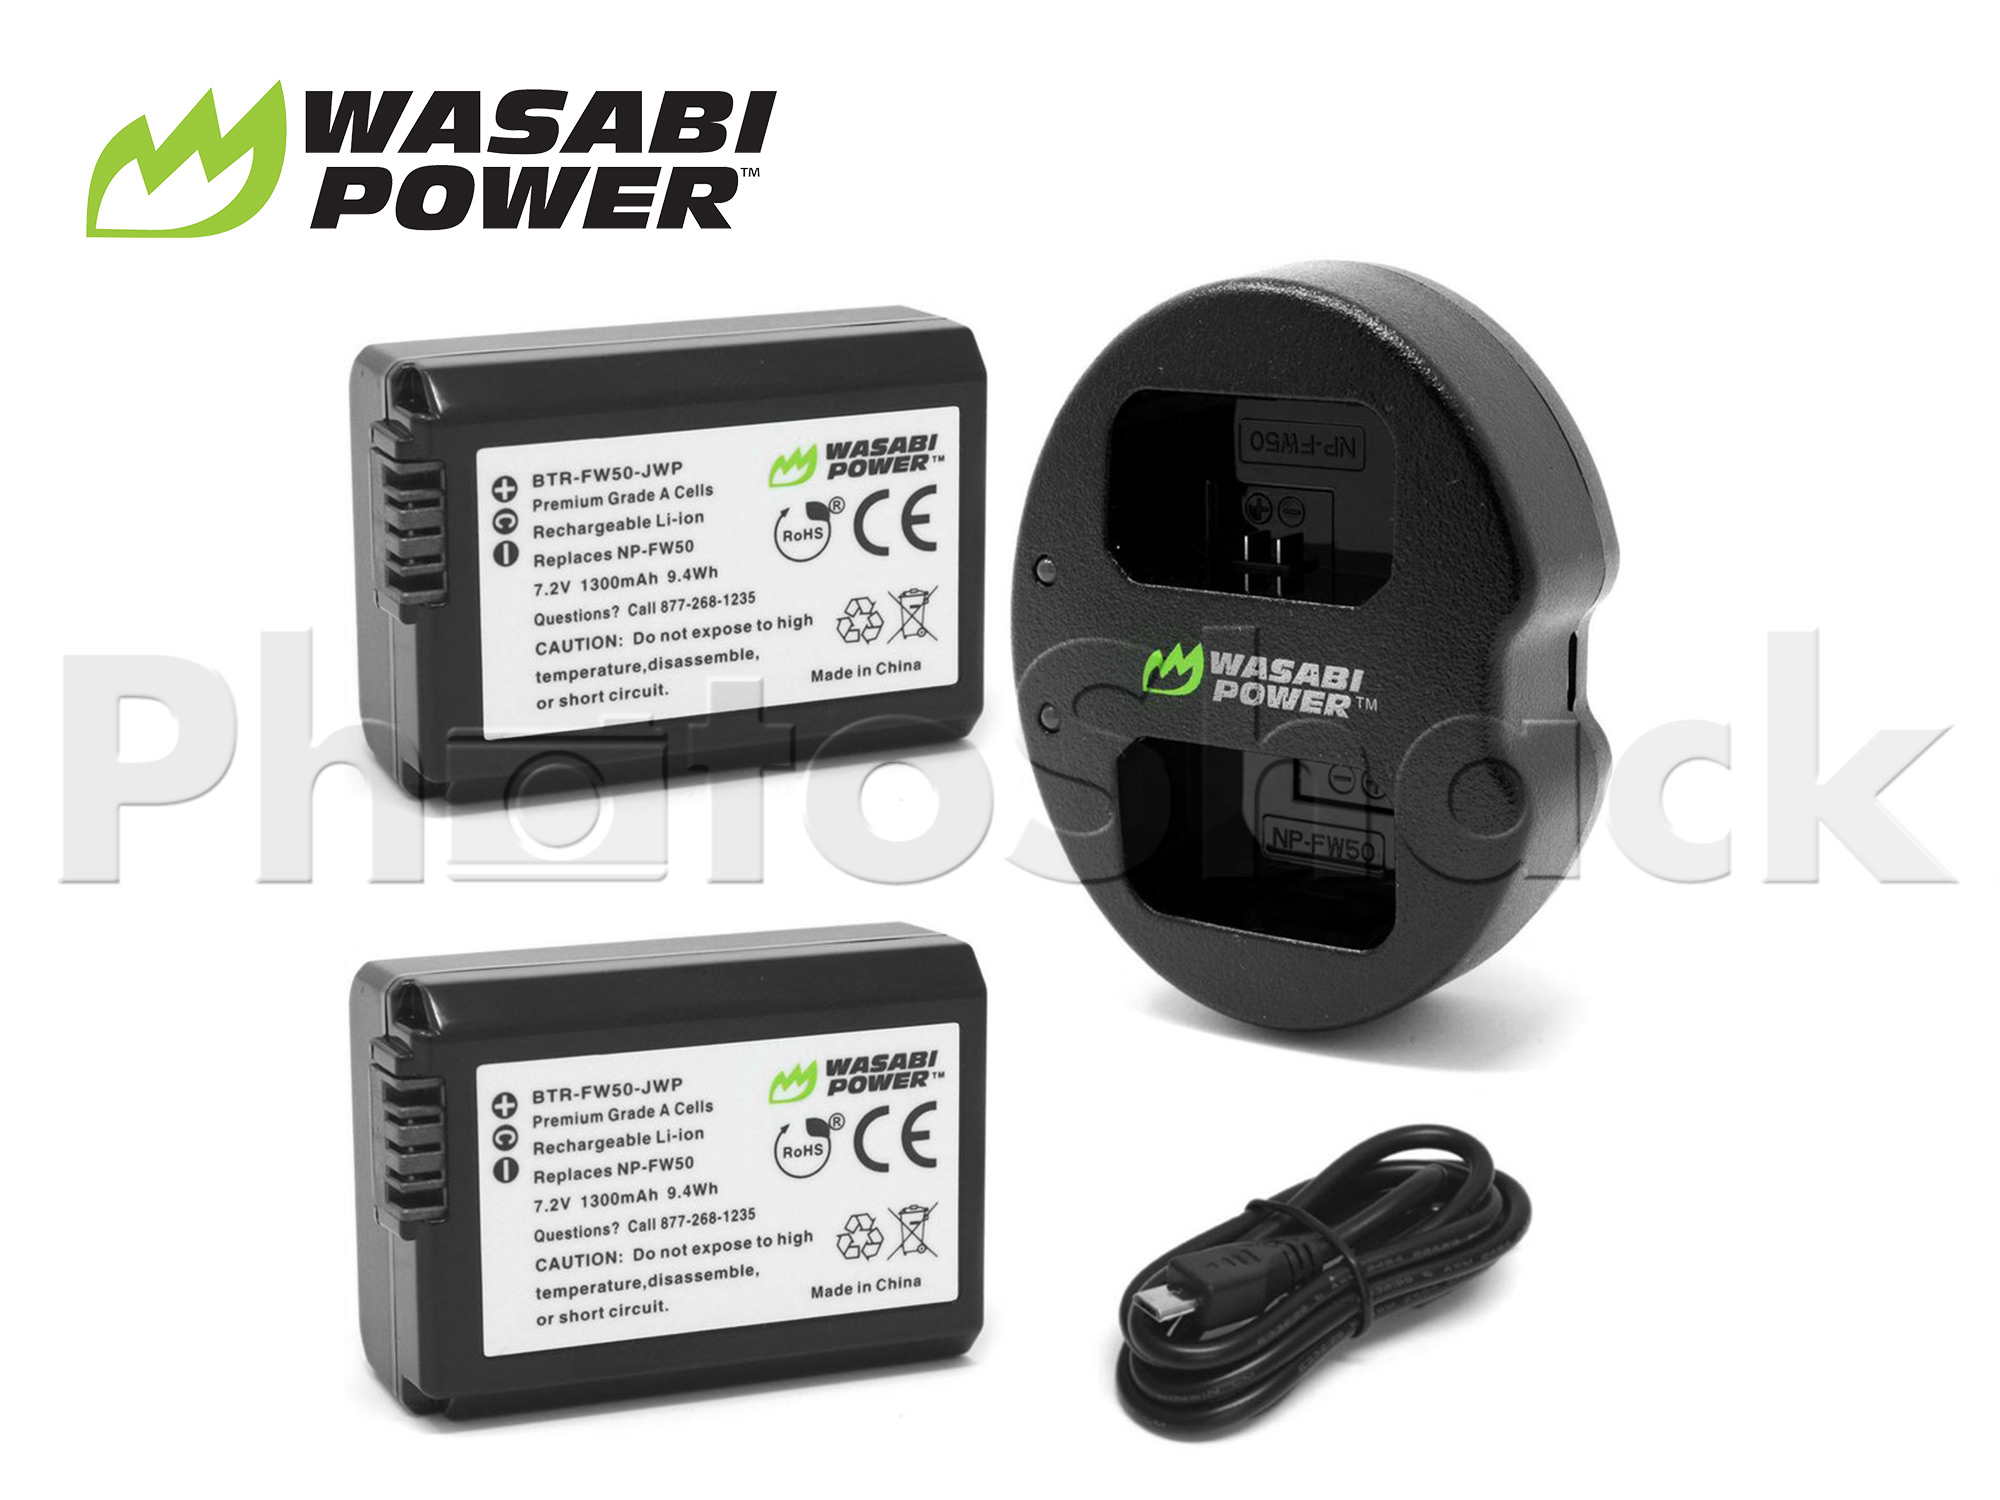 NPFW50 Battery for Sony (2 Pack + Dual Charger) - Wasabi Power